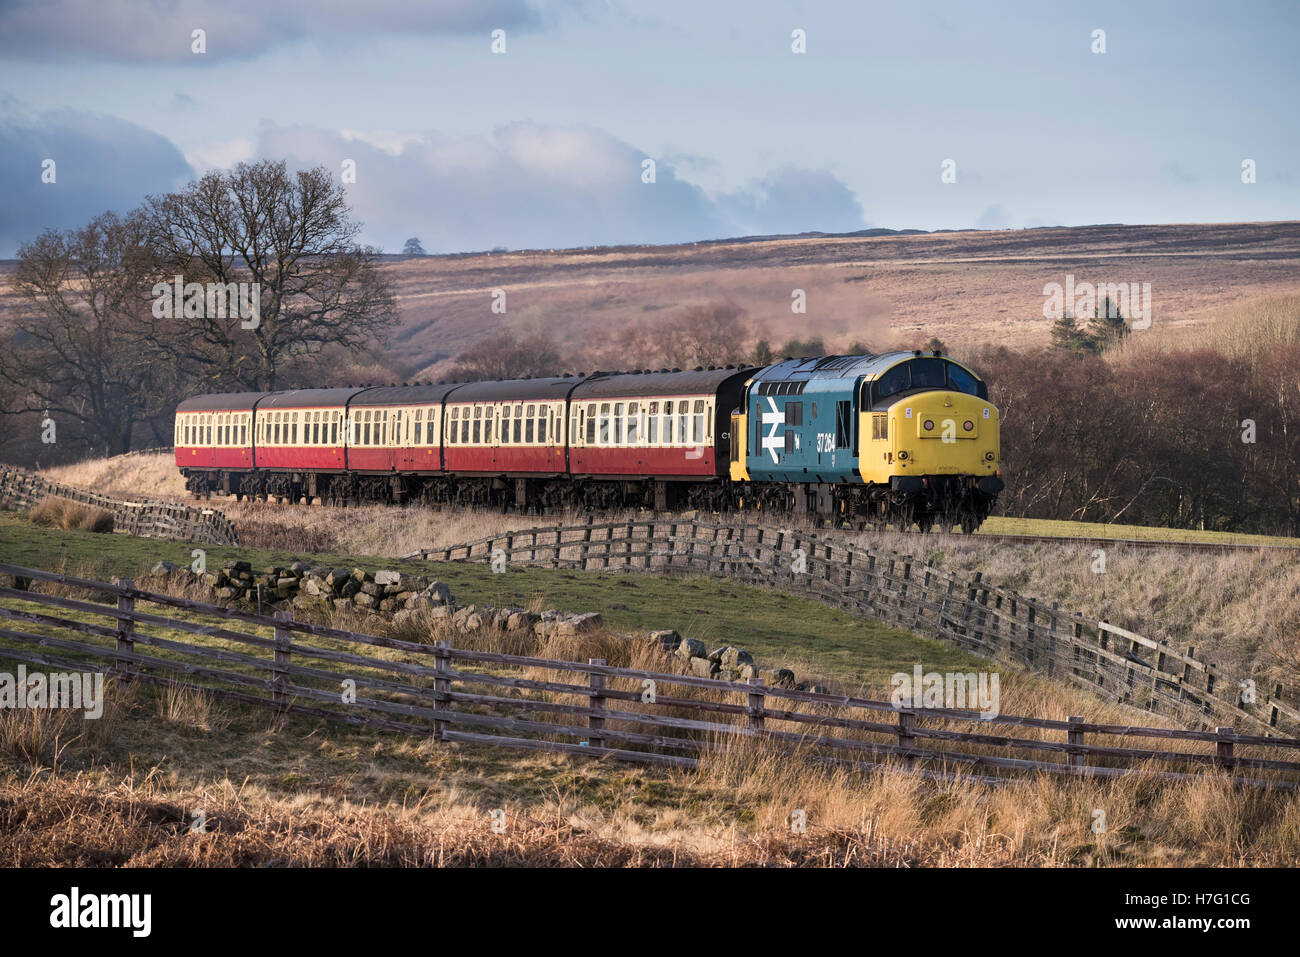 BR Class 37 'Co-Co' No. 37264 diesel locomotive train traveling on the tracks of the North Yorkshire Moors Railway, GB, UK. Stock Photo